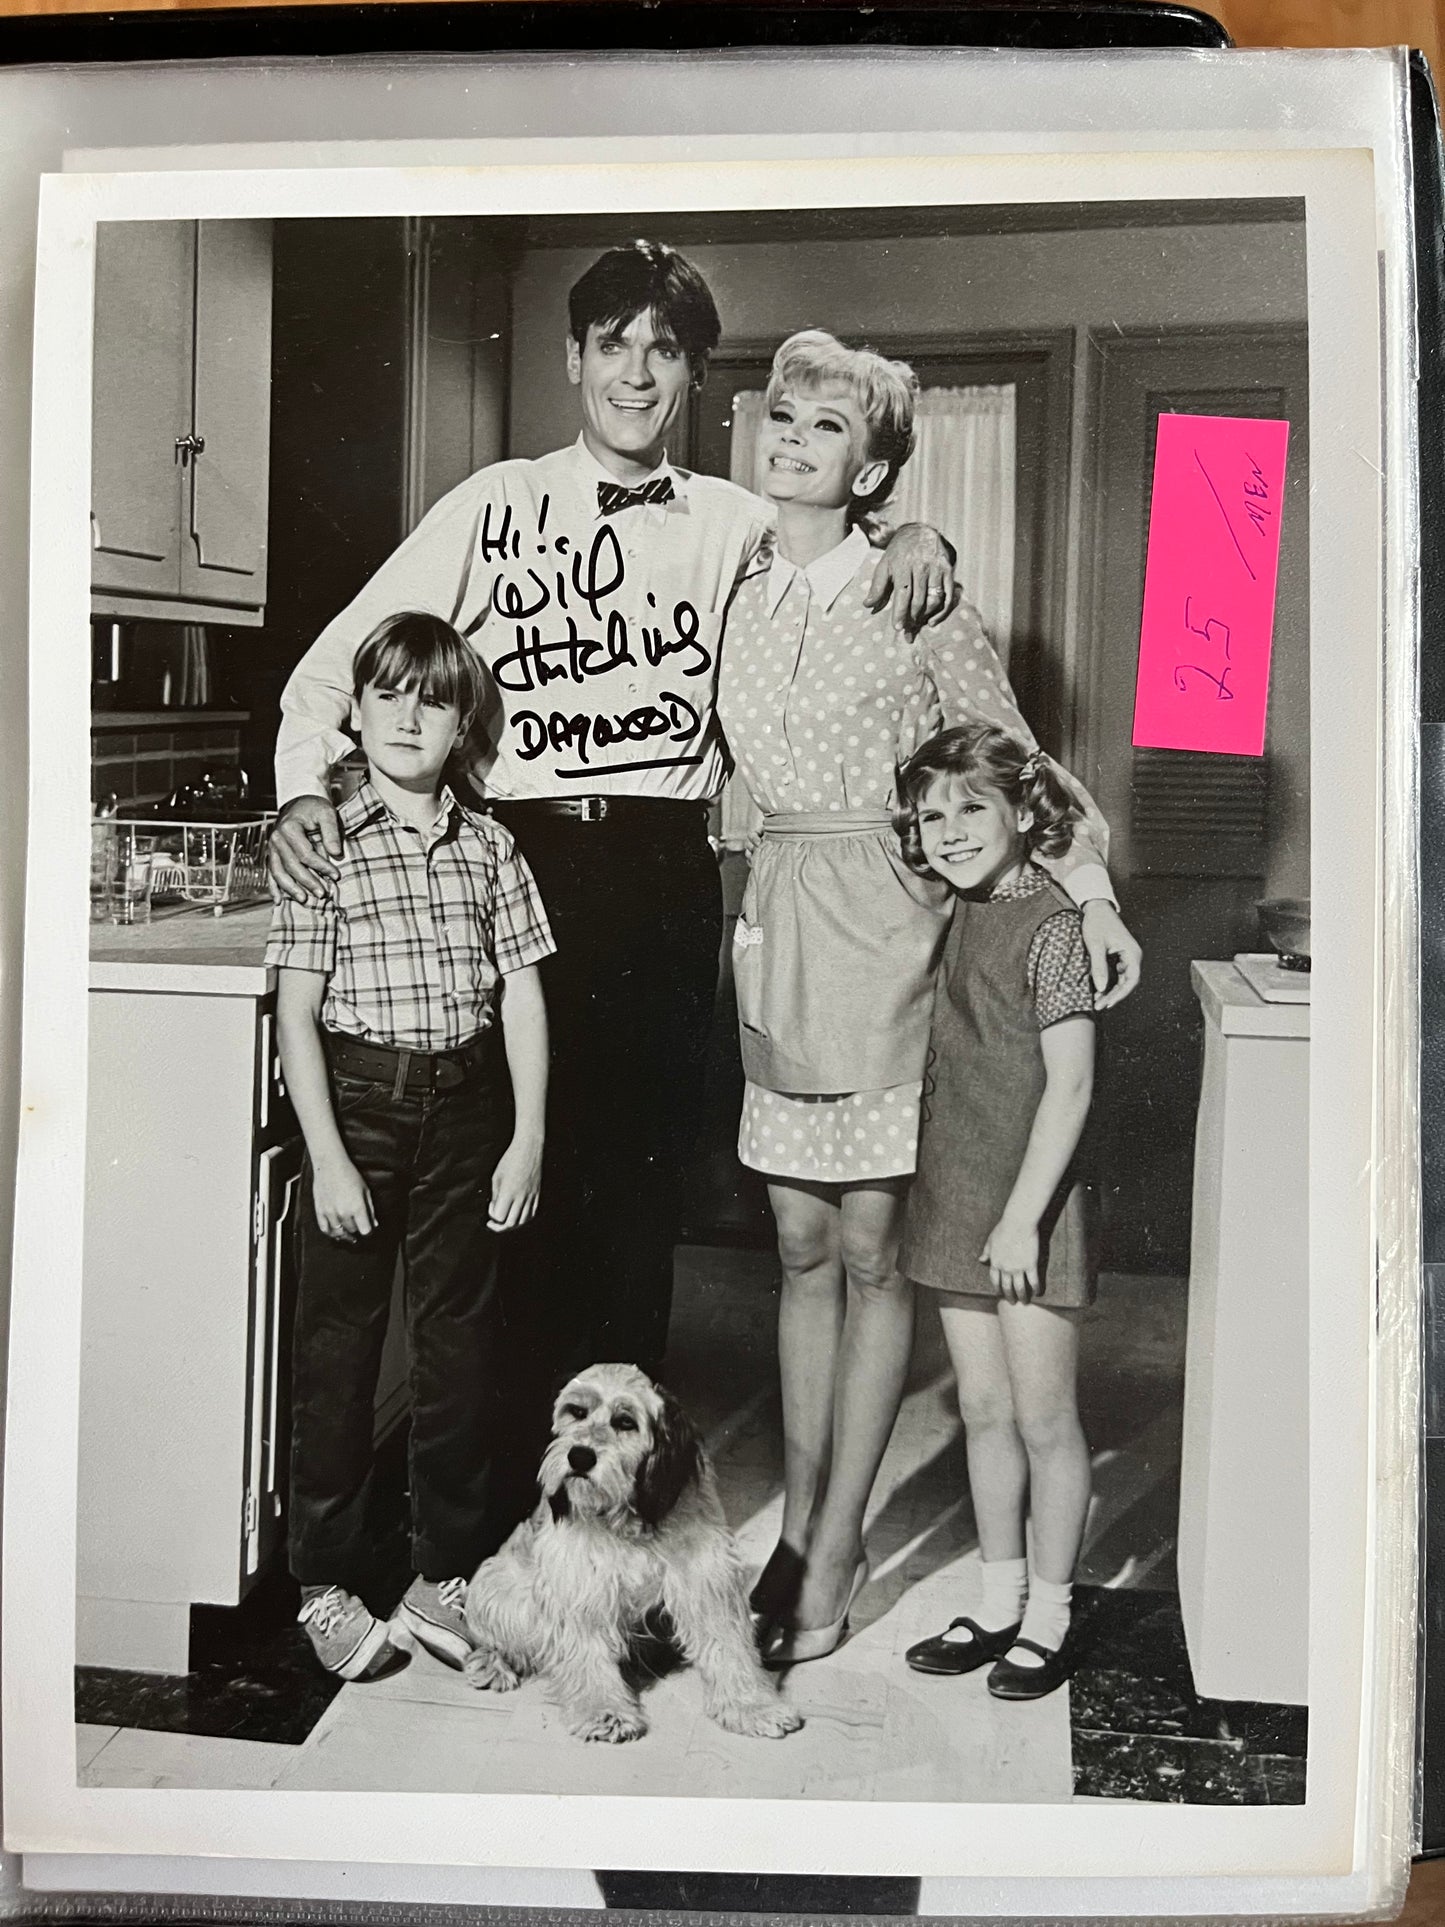 WILL HUTCHINS, Blondie and Dagwood, autograph